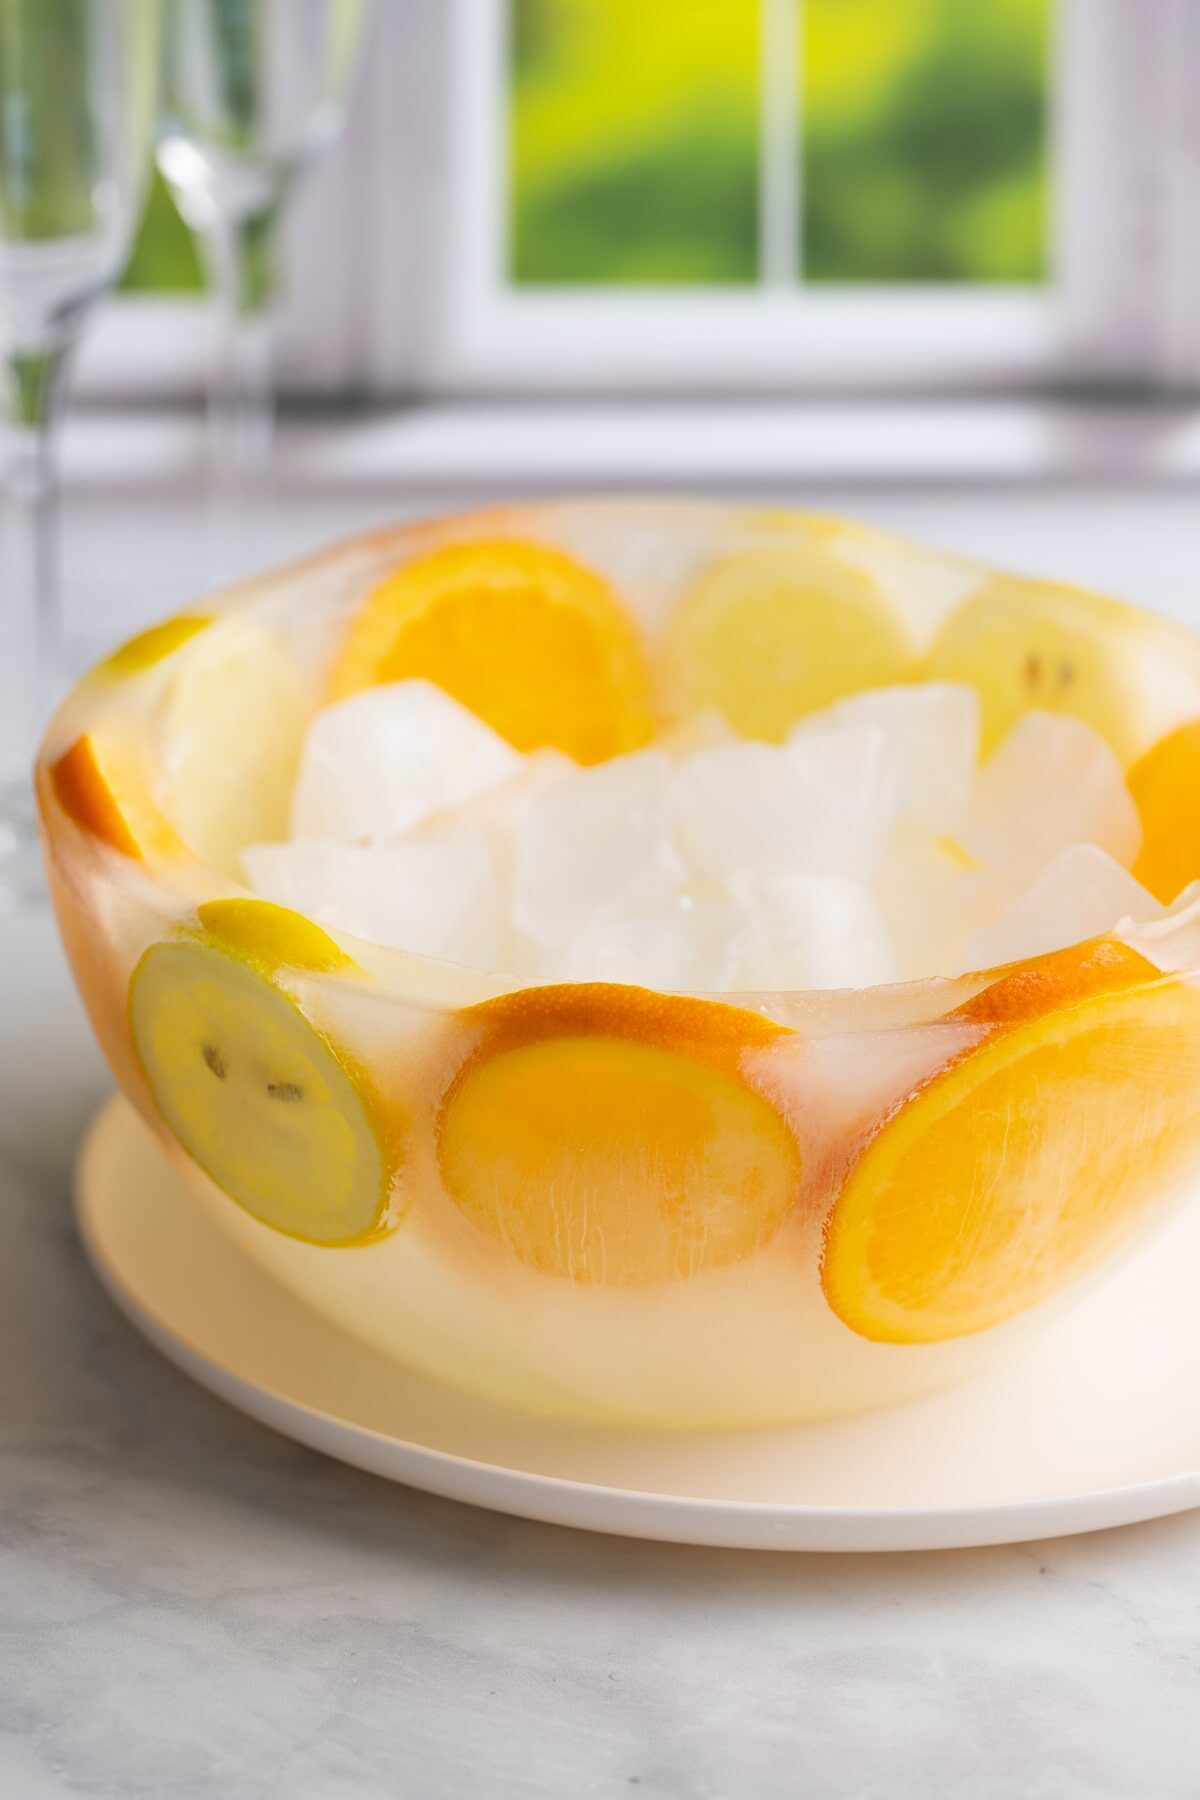 diy ice bowl with orange and lemon slices filled with ice.